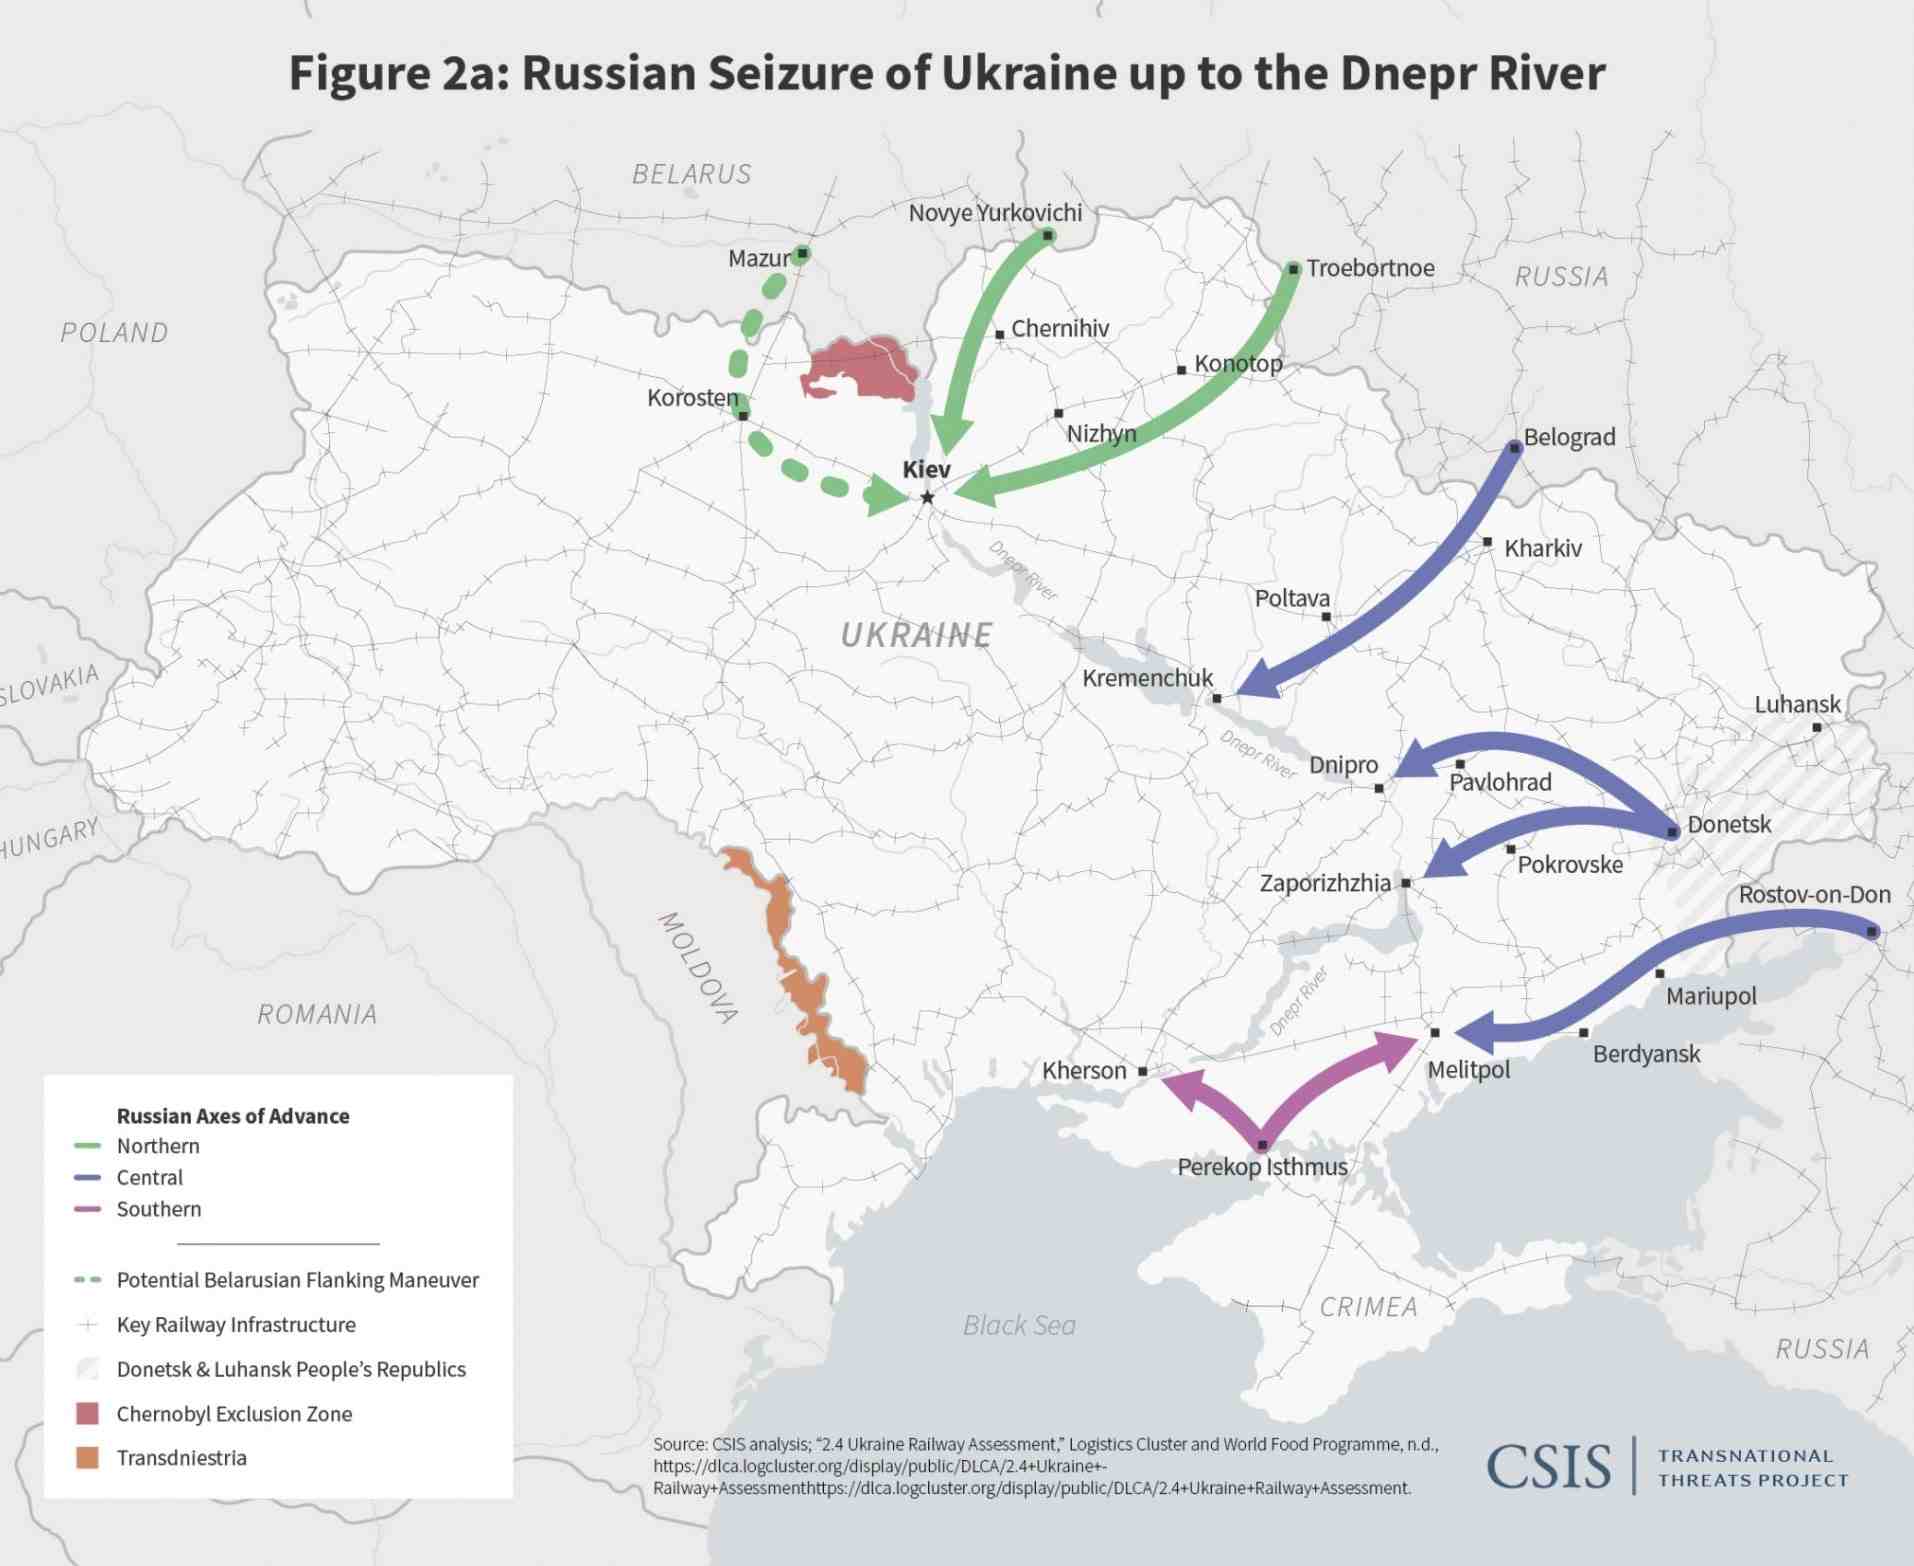 Photo: A map showing a possible Russian plan for the invasion of Ukraine, including the encirclement of Kyiv. Credit: Image courtesy of the Center for Strategic and International Studies